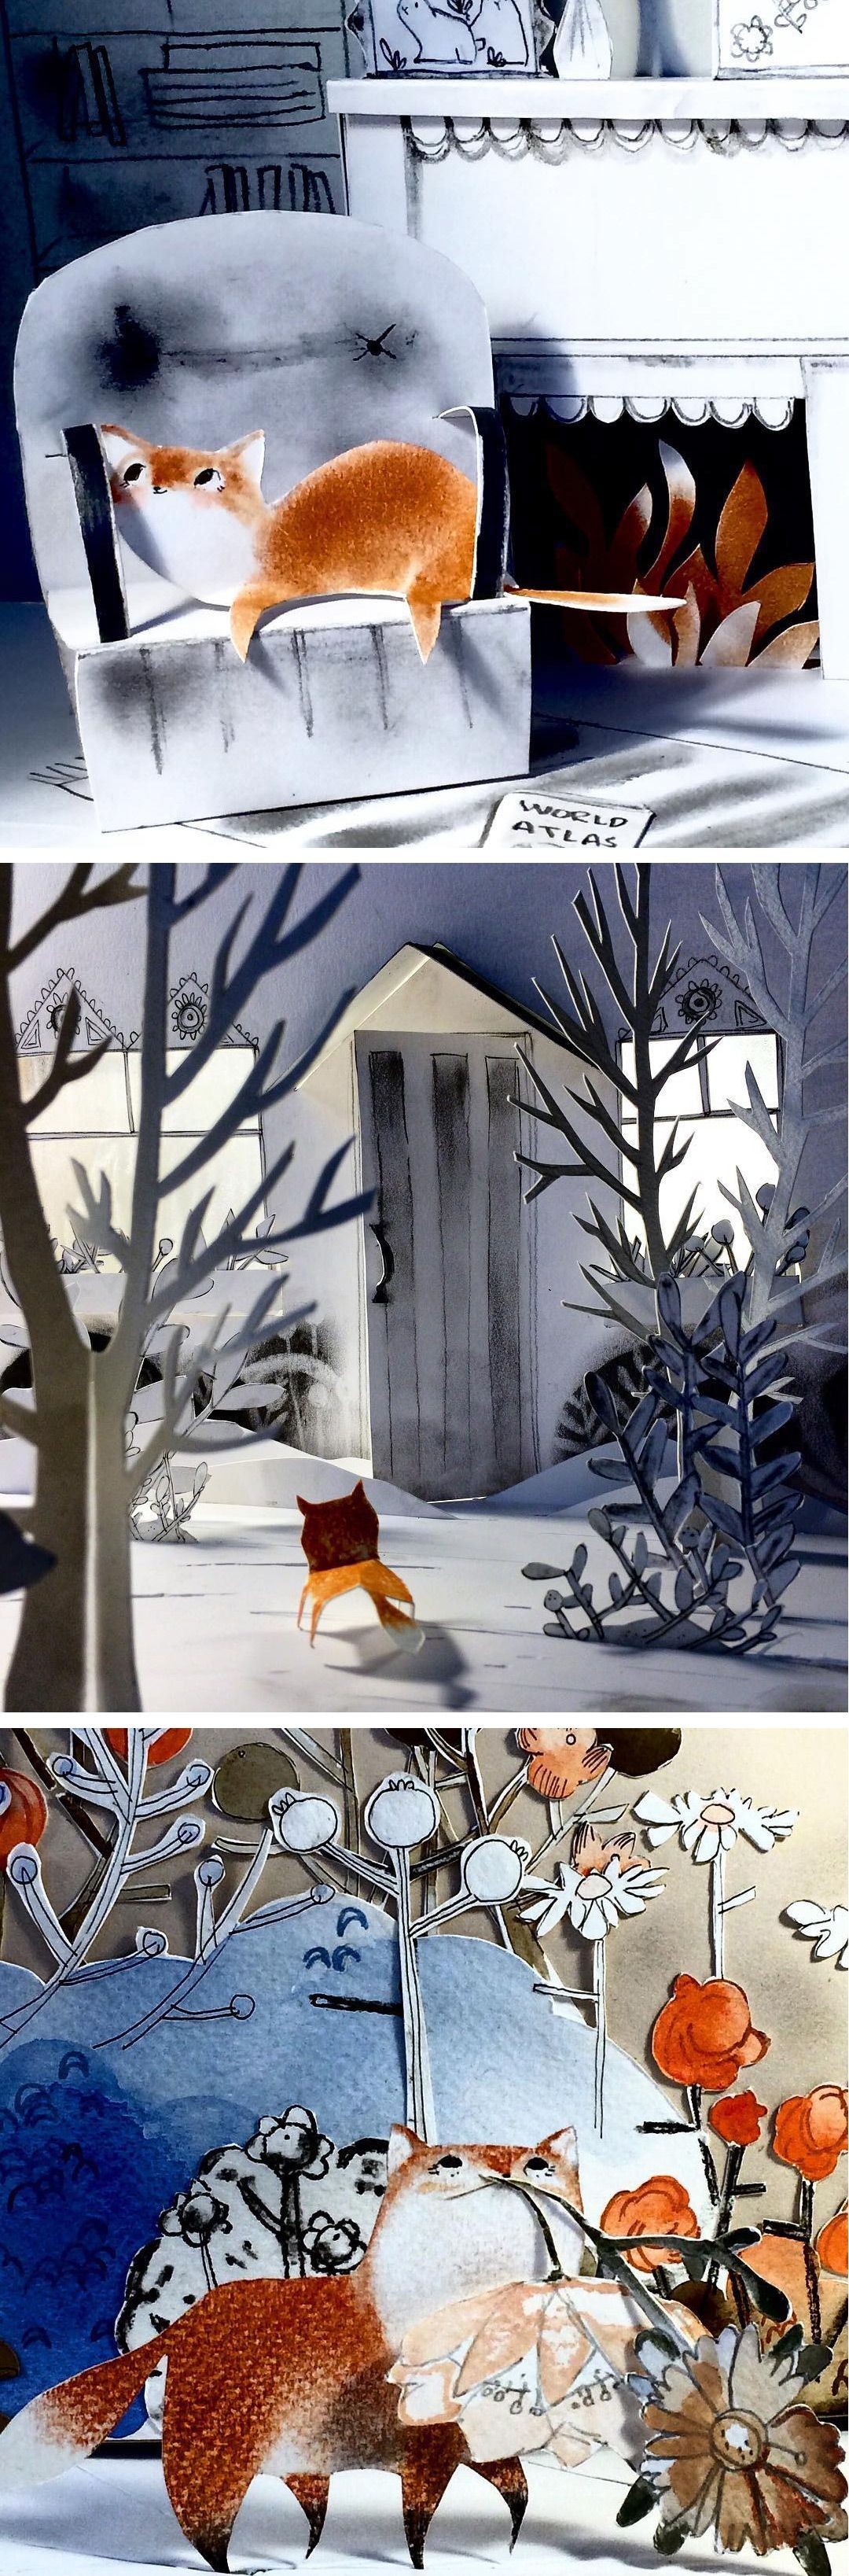 Papercraft Diorama Cut Paper Dioramas Chronicle the Storybook Adventures Of A Fox